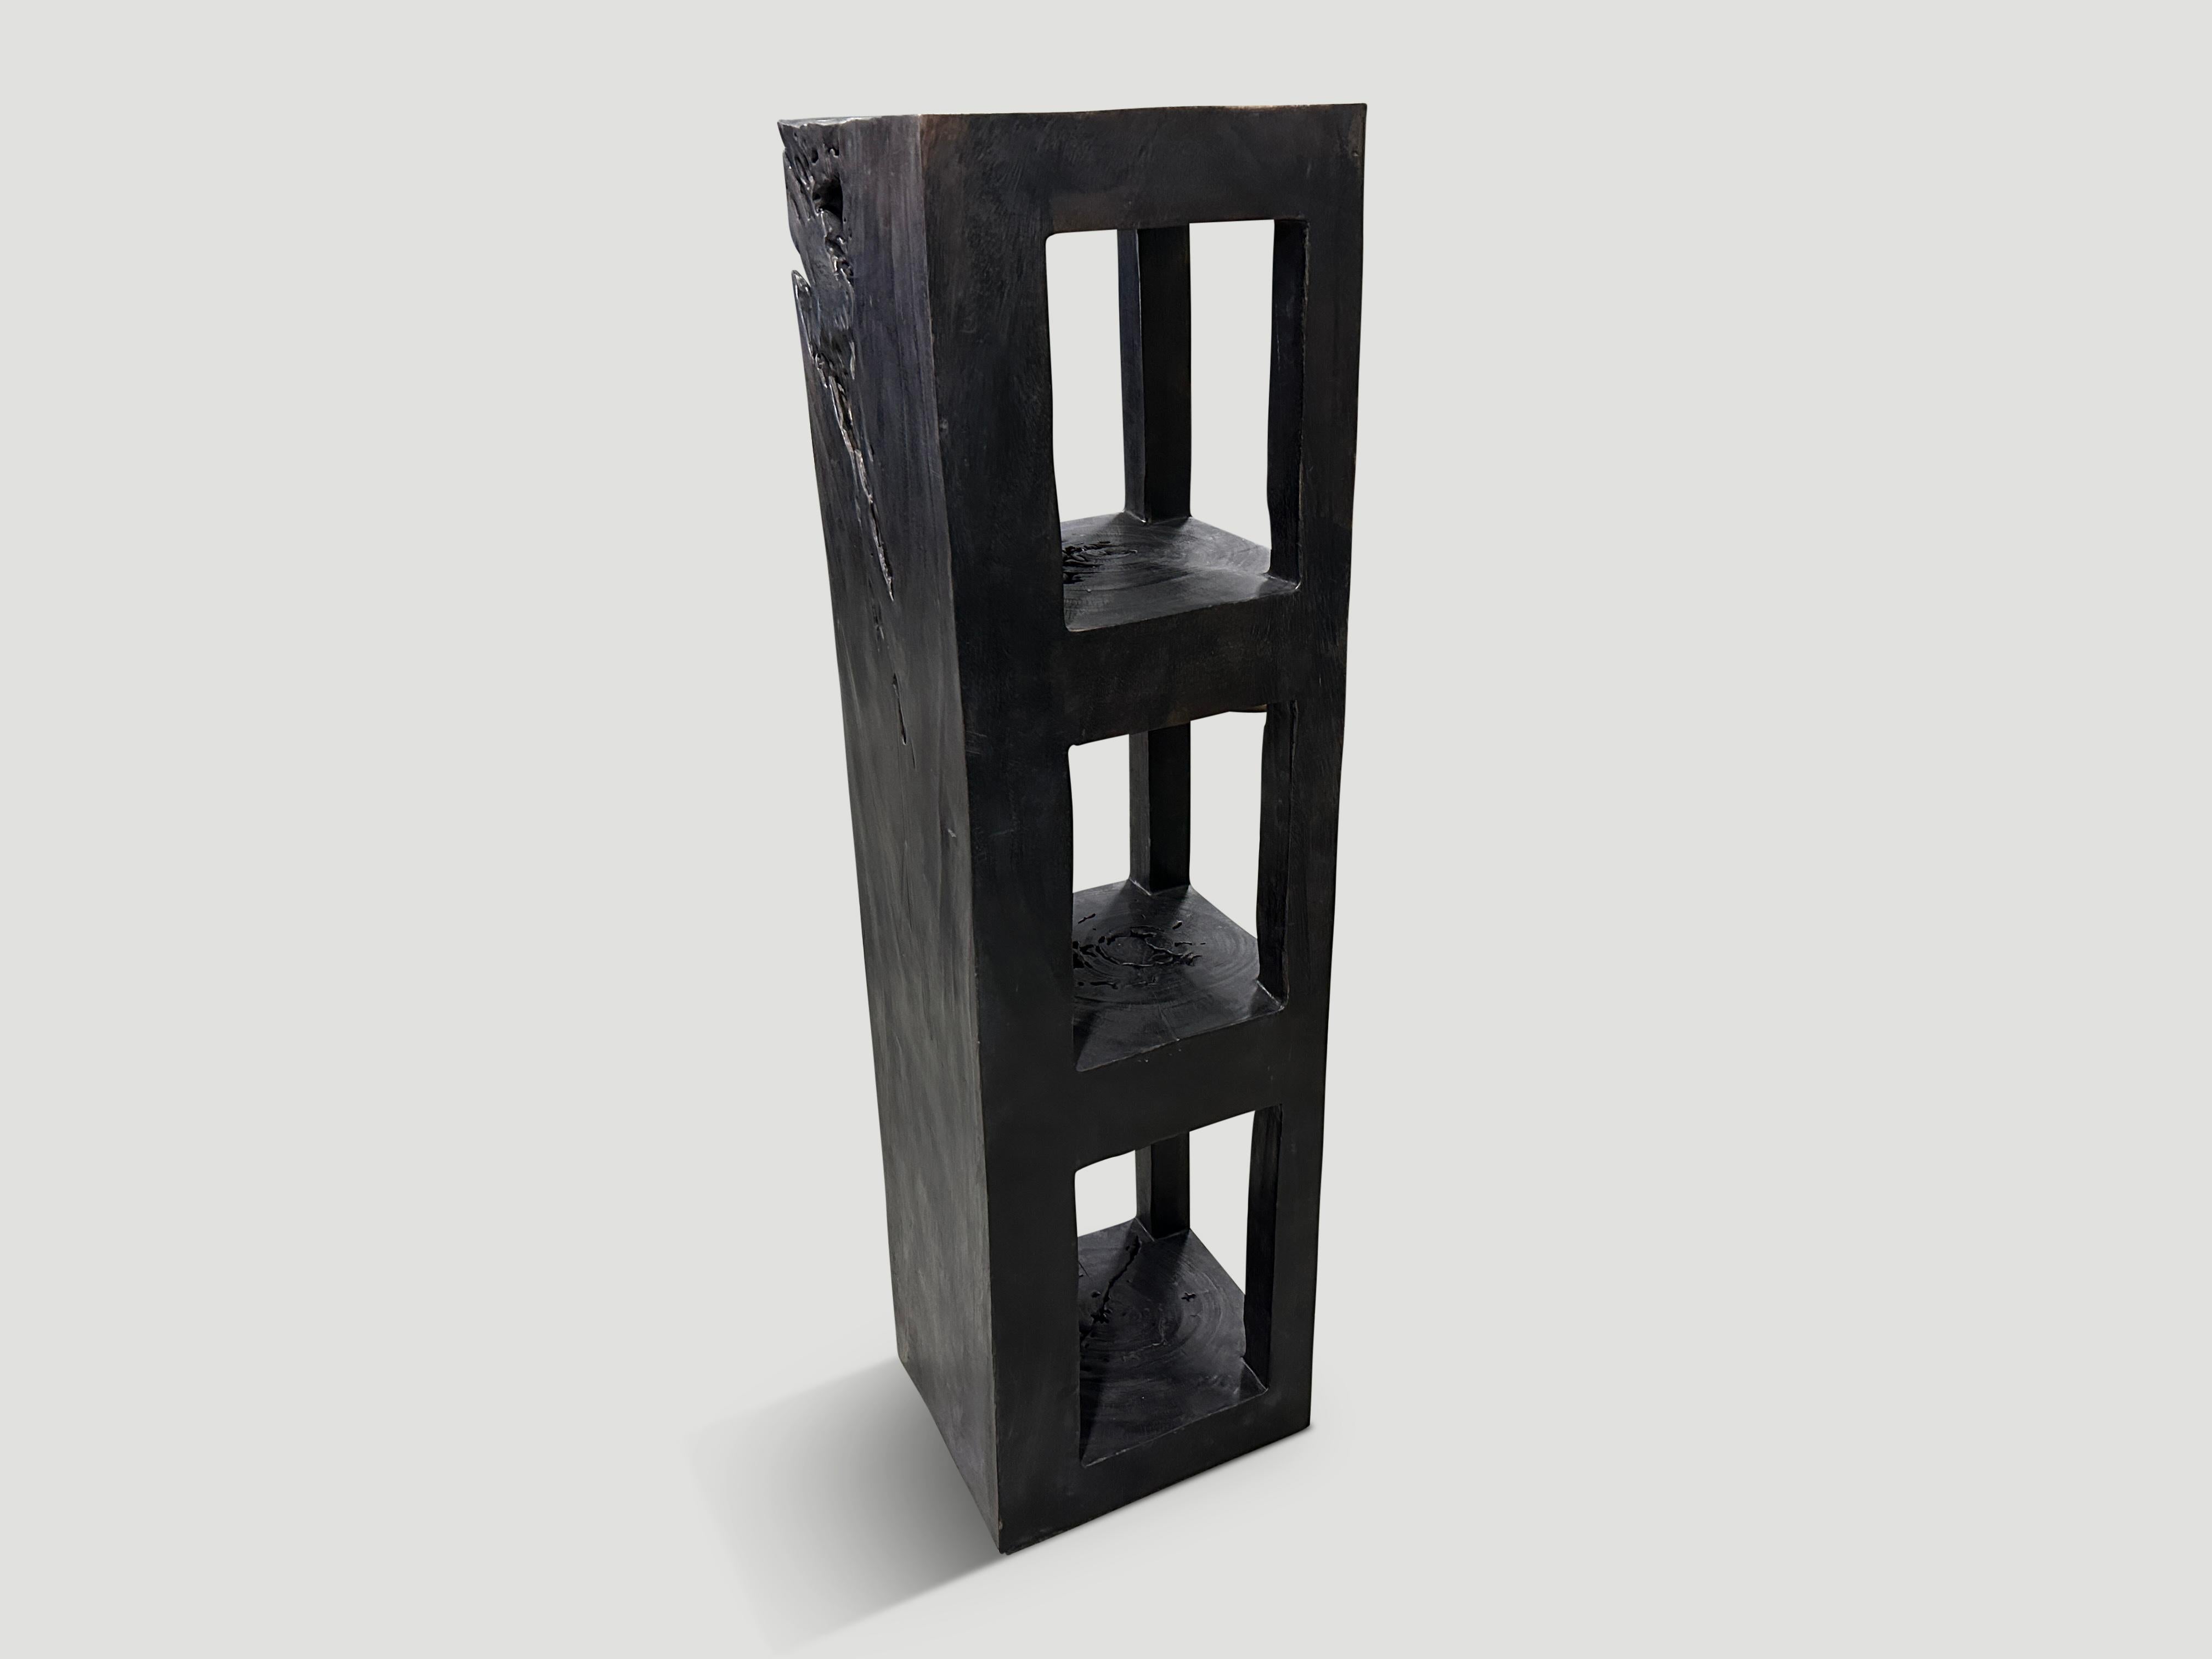 An impressive fallen teak log is hand carved into this beautiful display shelf whilst respecting the natural organic wood. The entire piece is cut from one log with no joins. Charred, sanded and sealed revealing the beautiful wood grain.

The